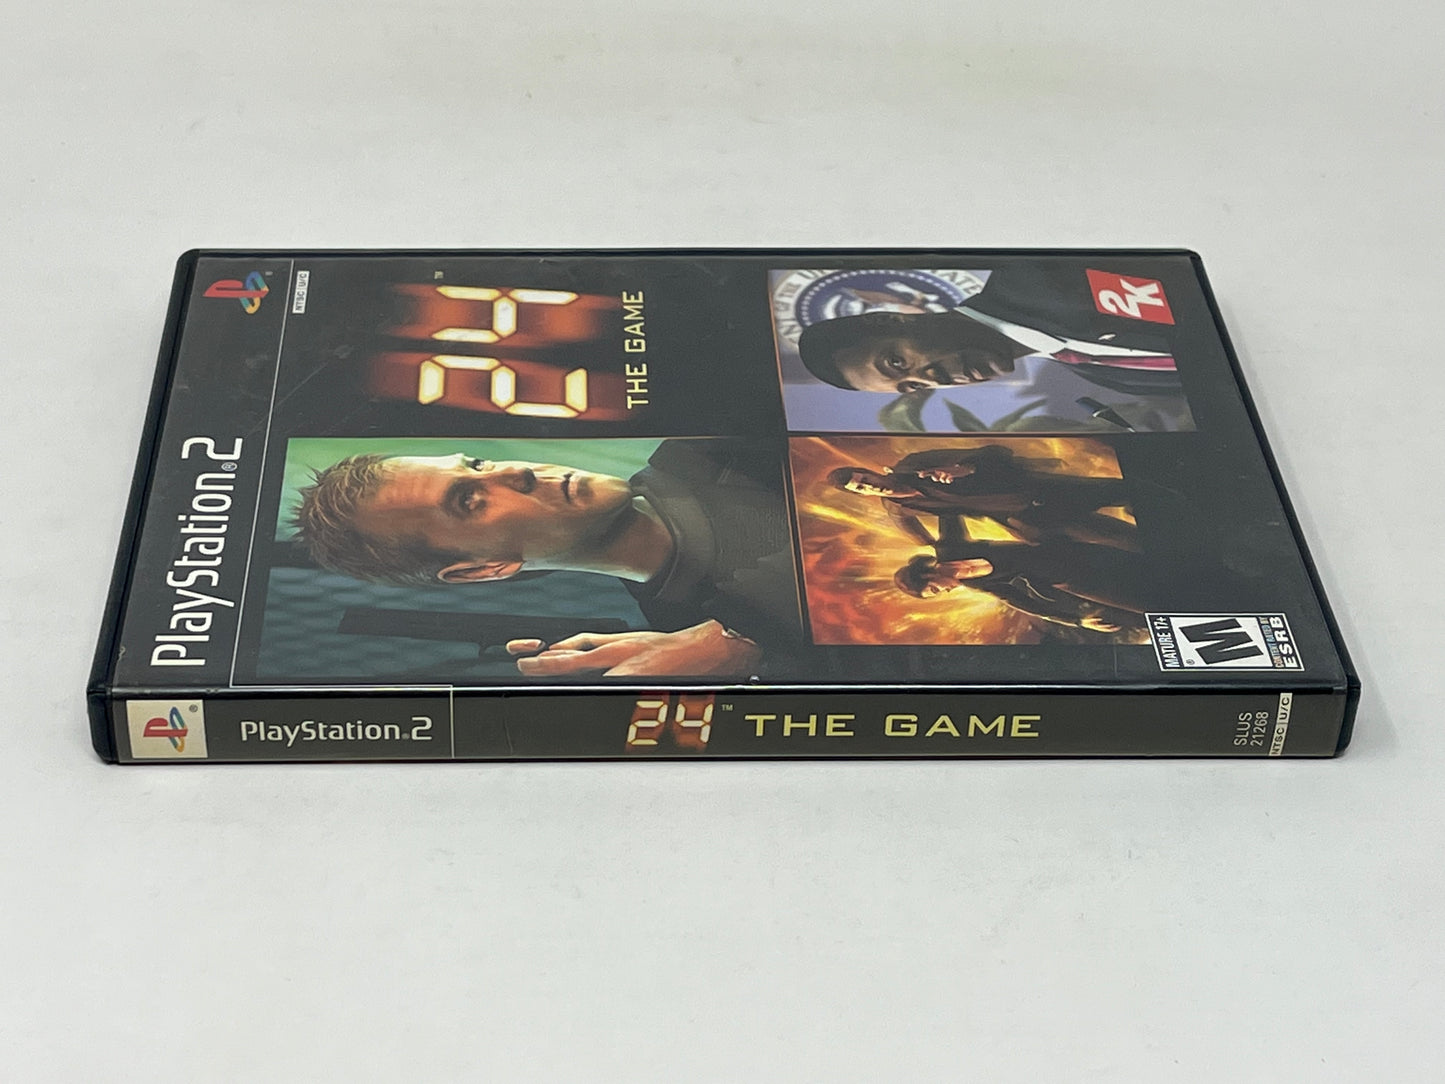 Sony PlayStation 2 PS2 - 24 The Game - Complete